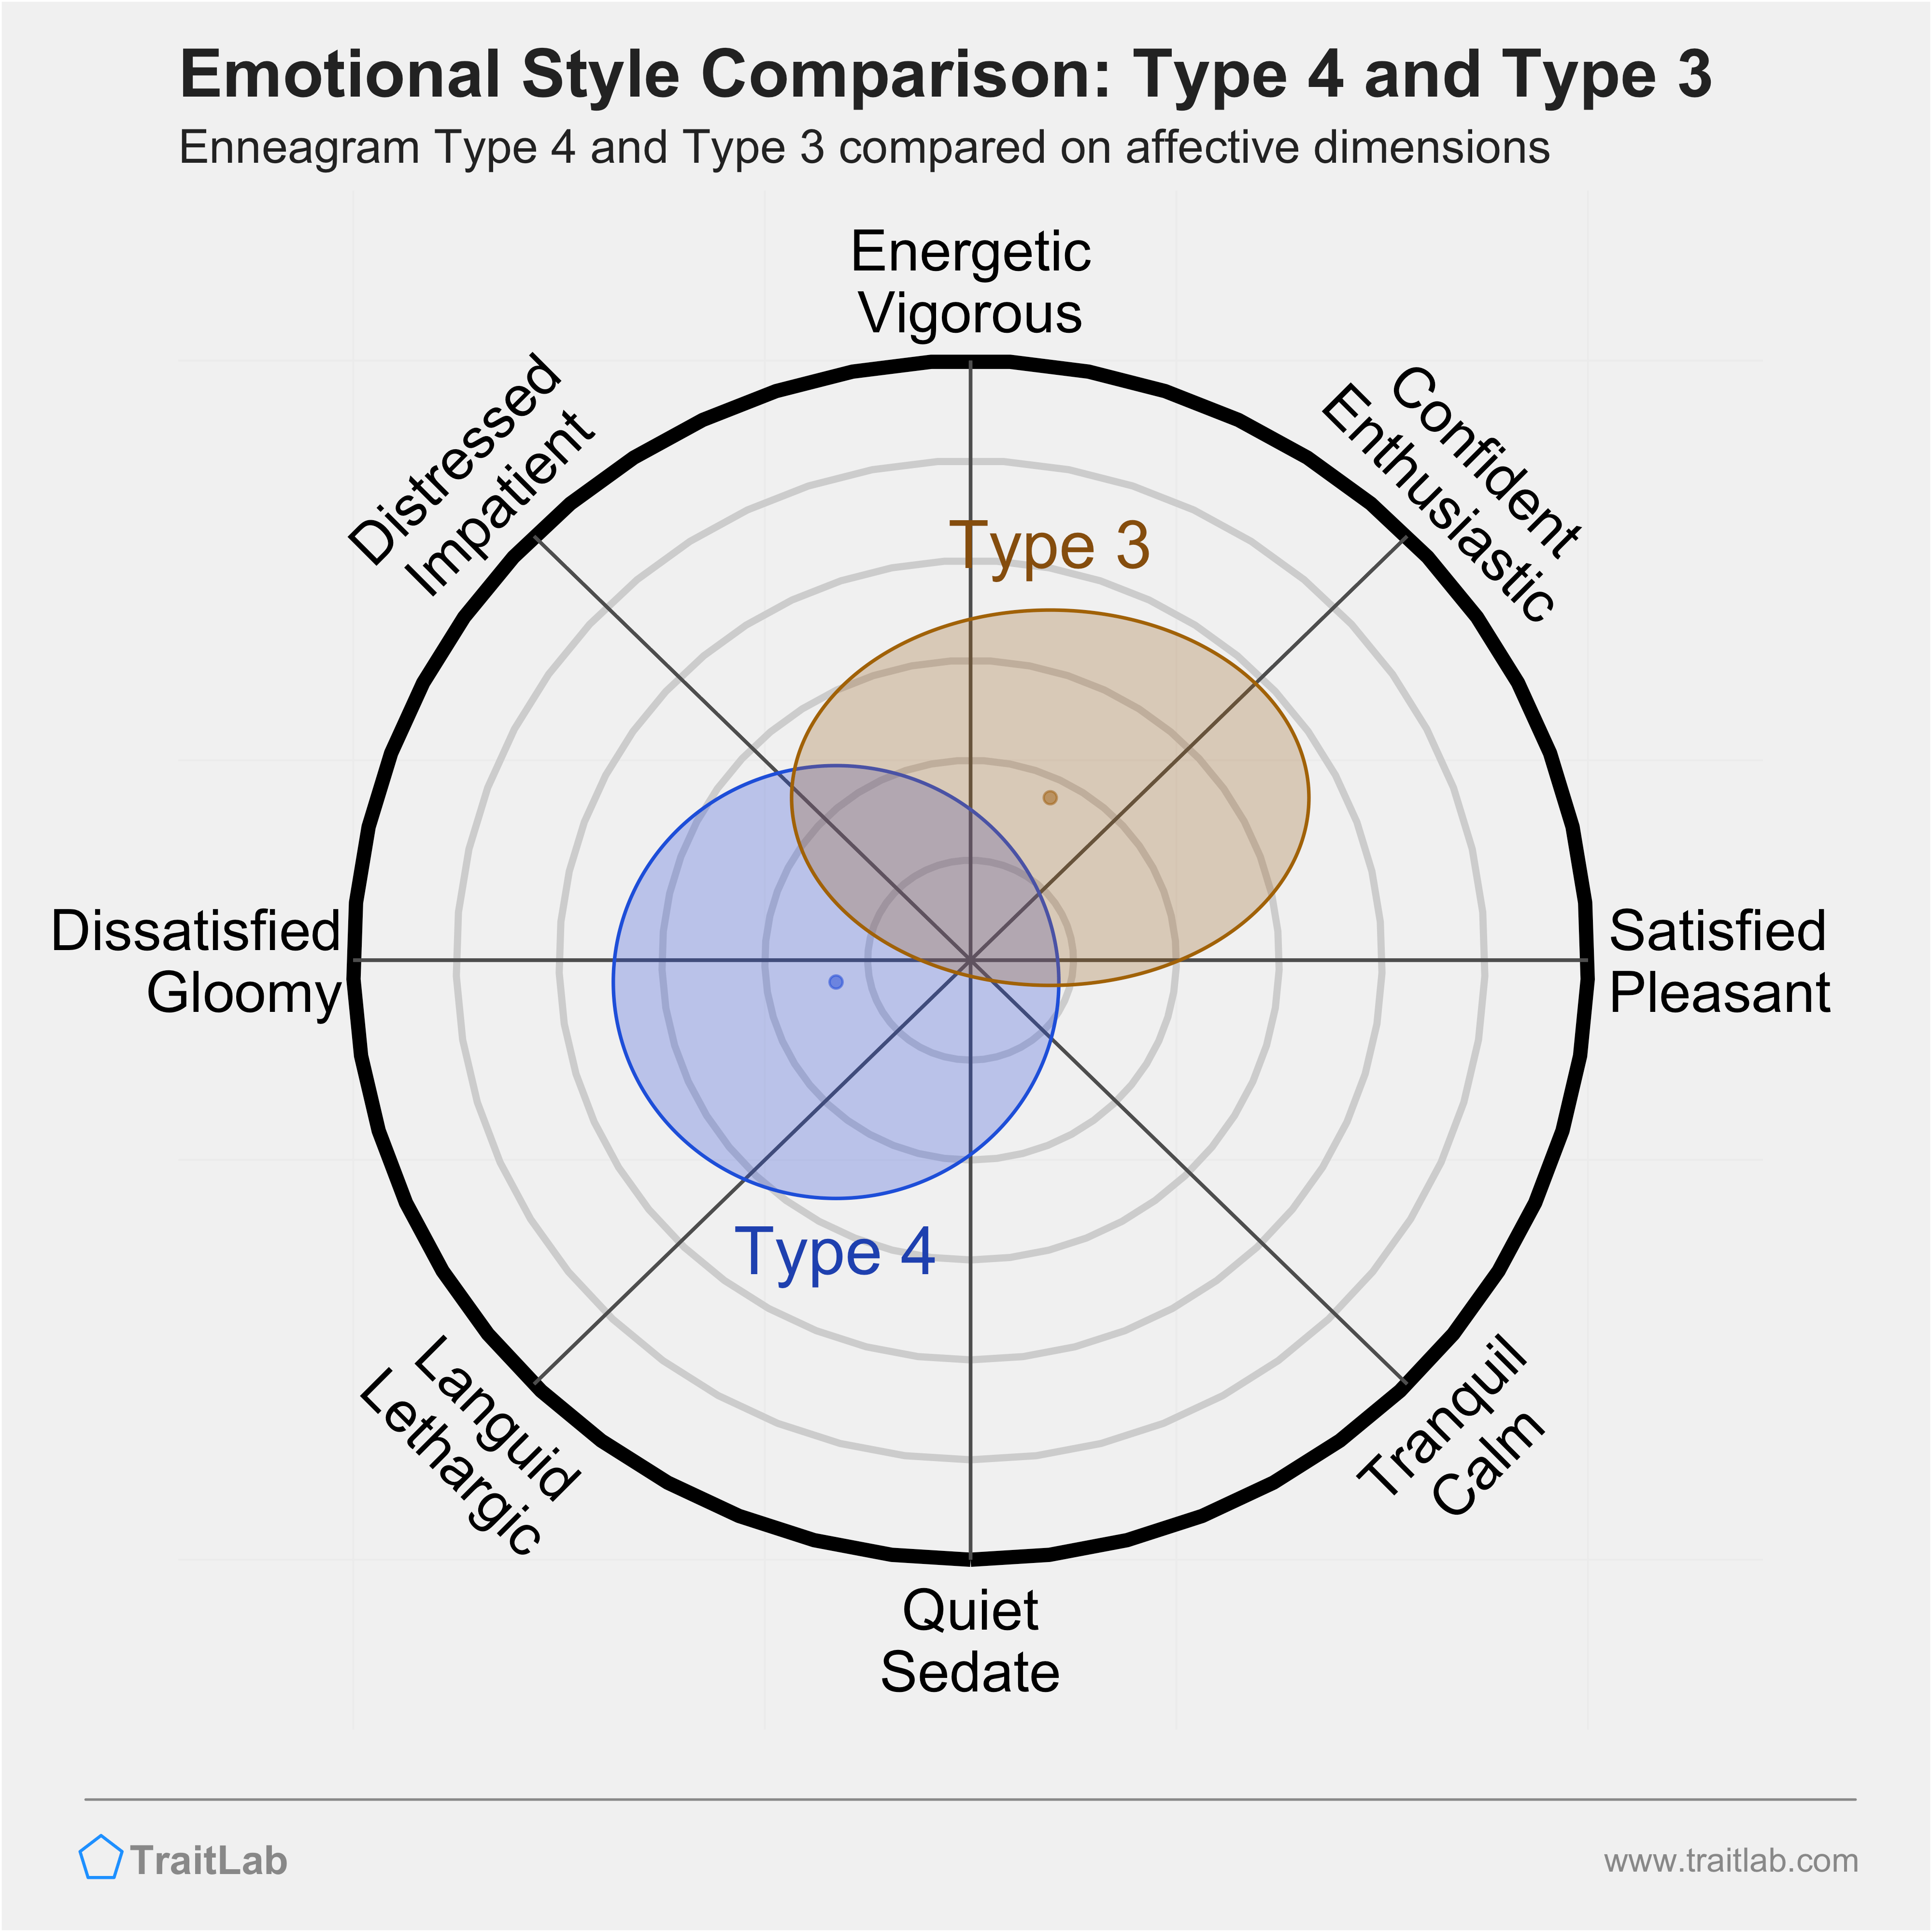 Type 4 and Type 3 comparison across emotional (affective) dimensions